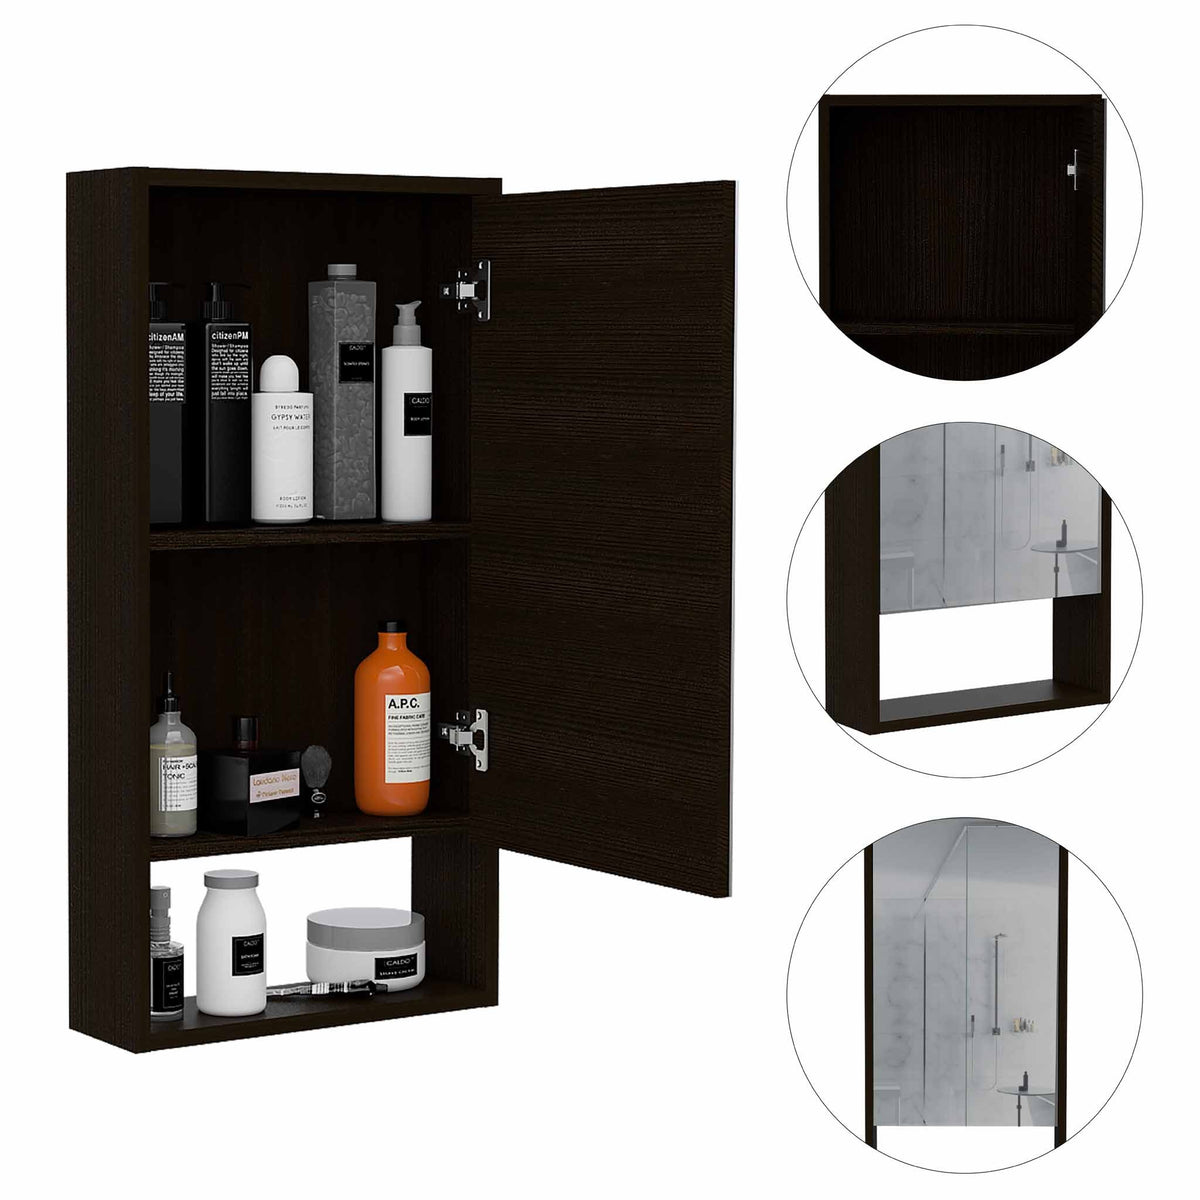 Tuhome Mariana Medicine Cabinet, One External Shelf, One-Door Mirror Cabinet, Two Internal Shelves, White, for Bathroom